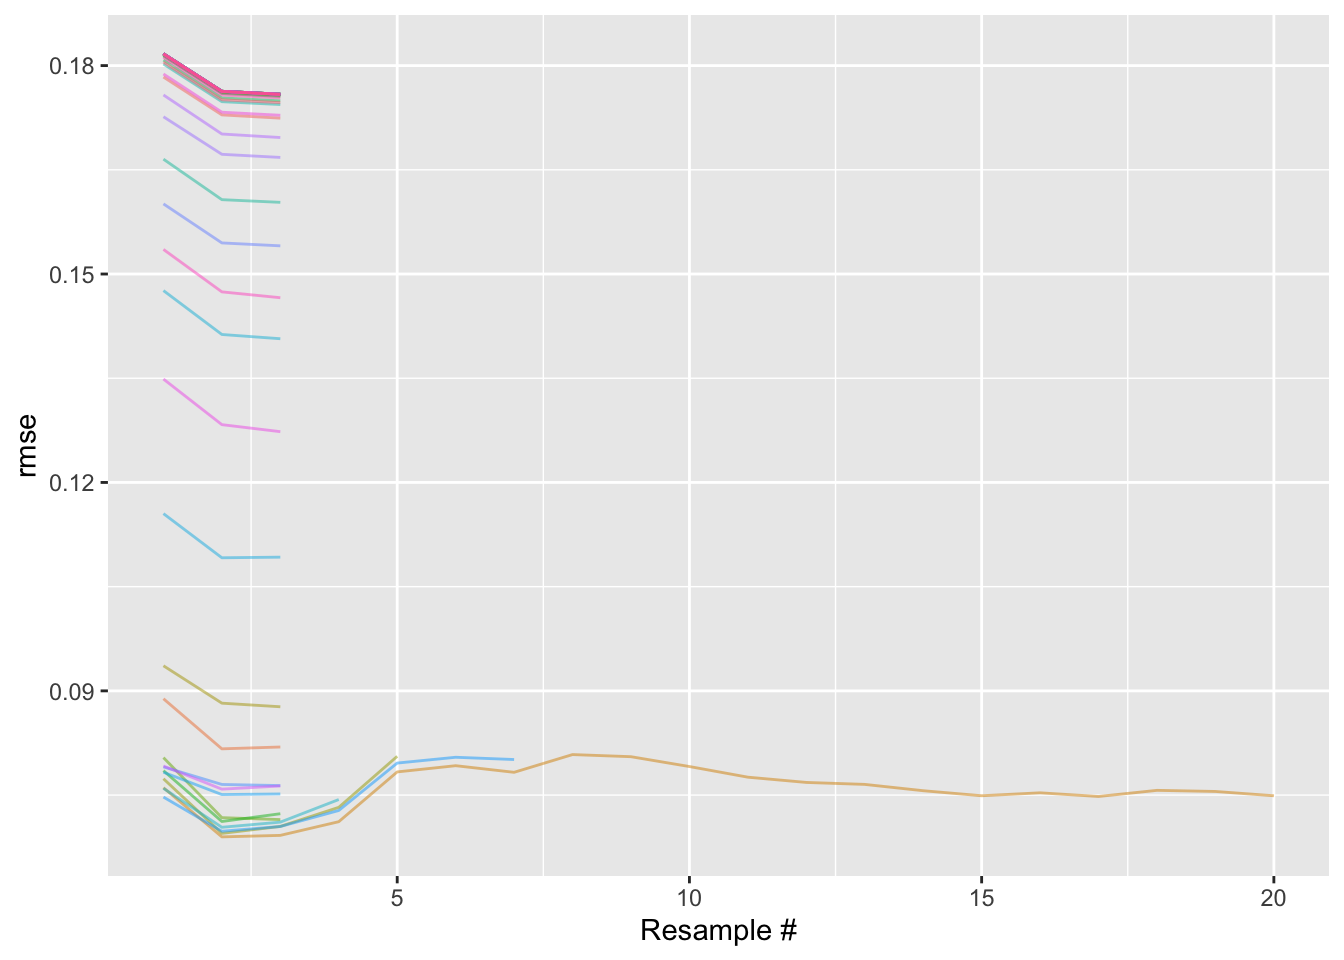 A ggplot2 line plot, with resample number on the x axis and root mean squared error on the y axis. For resamples 1 through 3, 50 lines show the distributions of error for each model configuration. After the 3rd resample, a vast majority of the lines disappear, and only the lines associated with the smallest error remain. Moving from left to right along the x axis, lines gradually disappear, until only one line is left, which stretches horizontally all the way to resample 20.